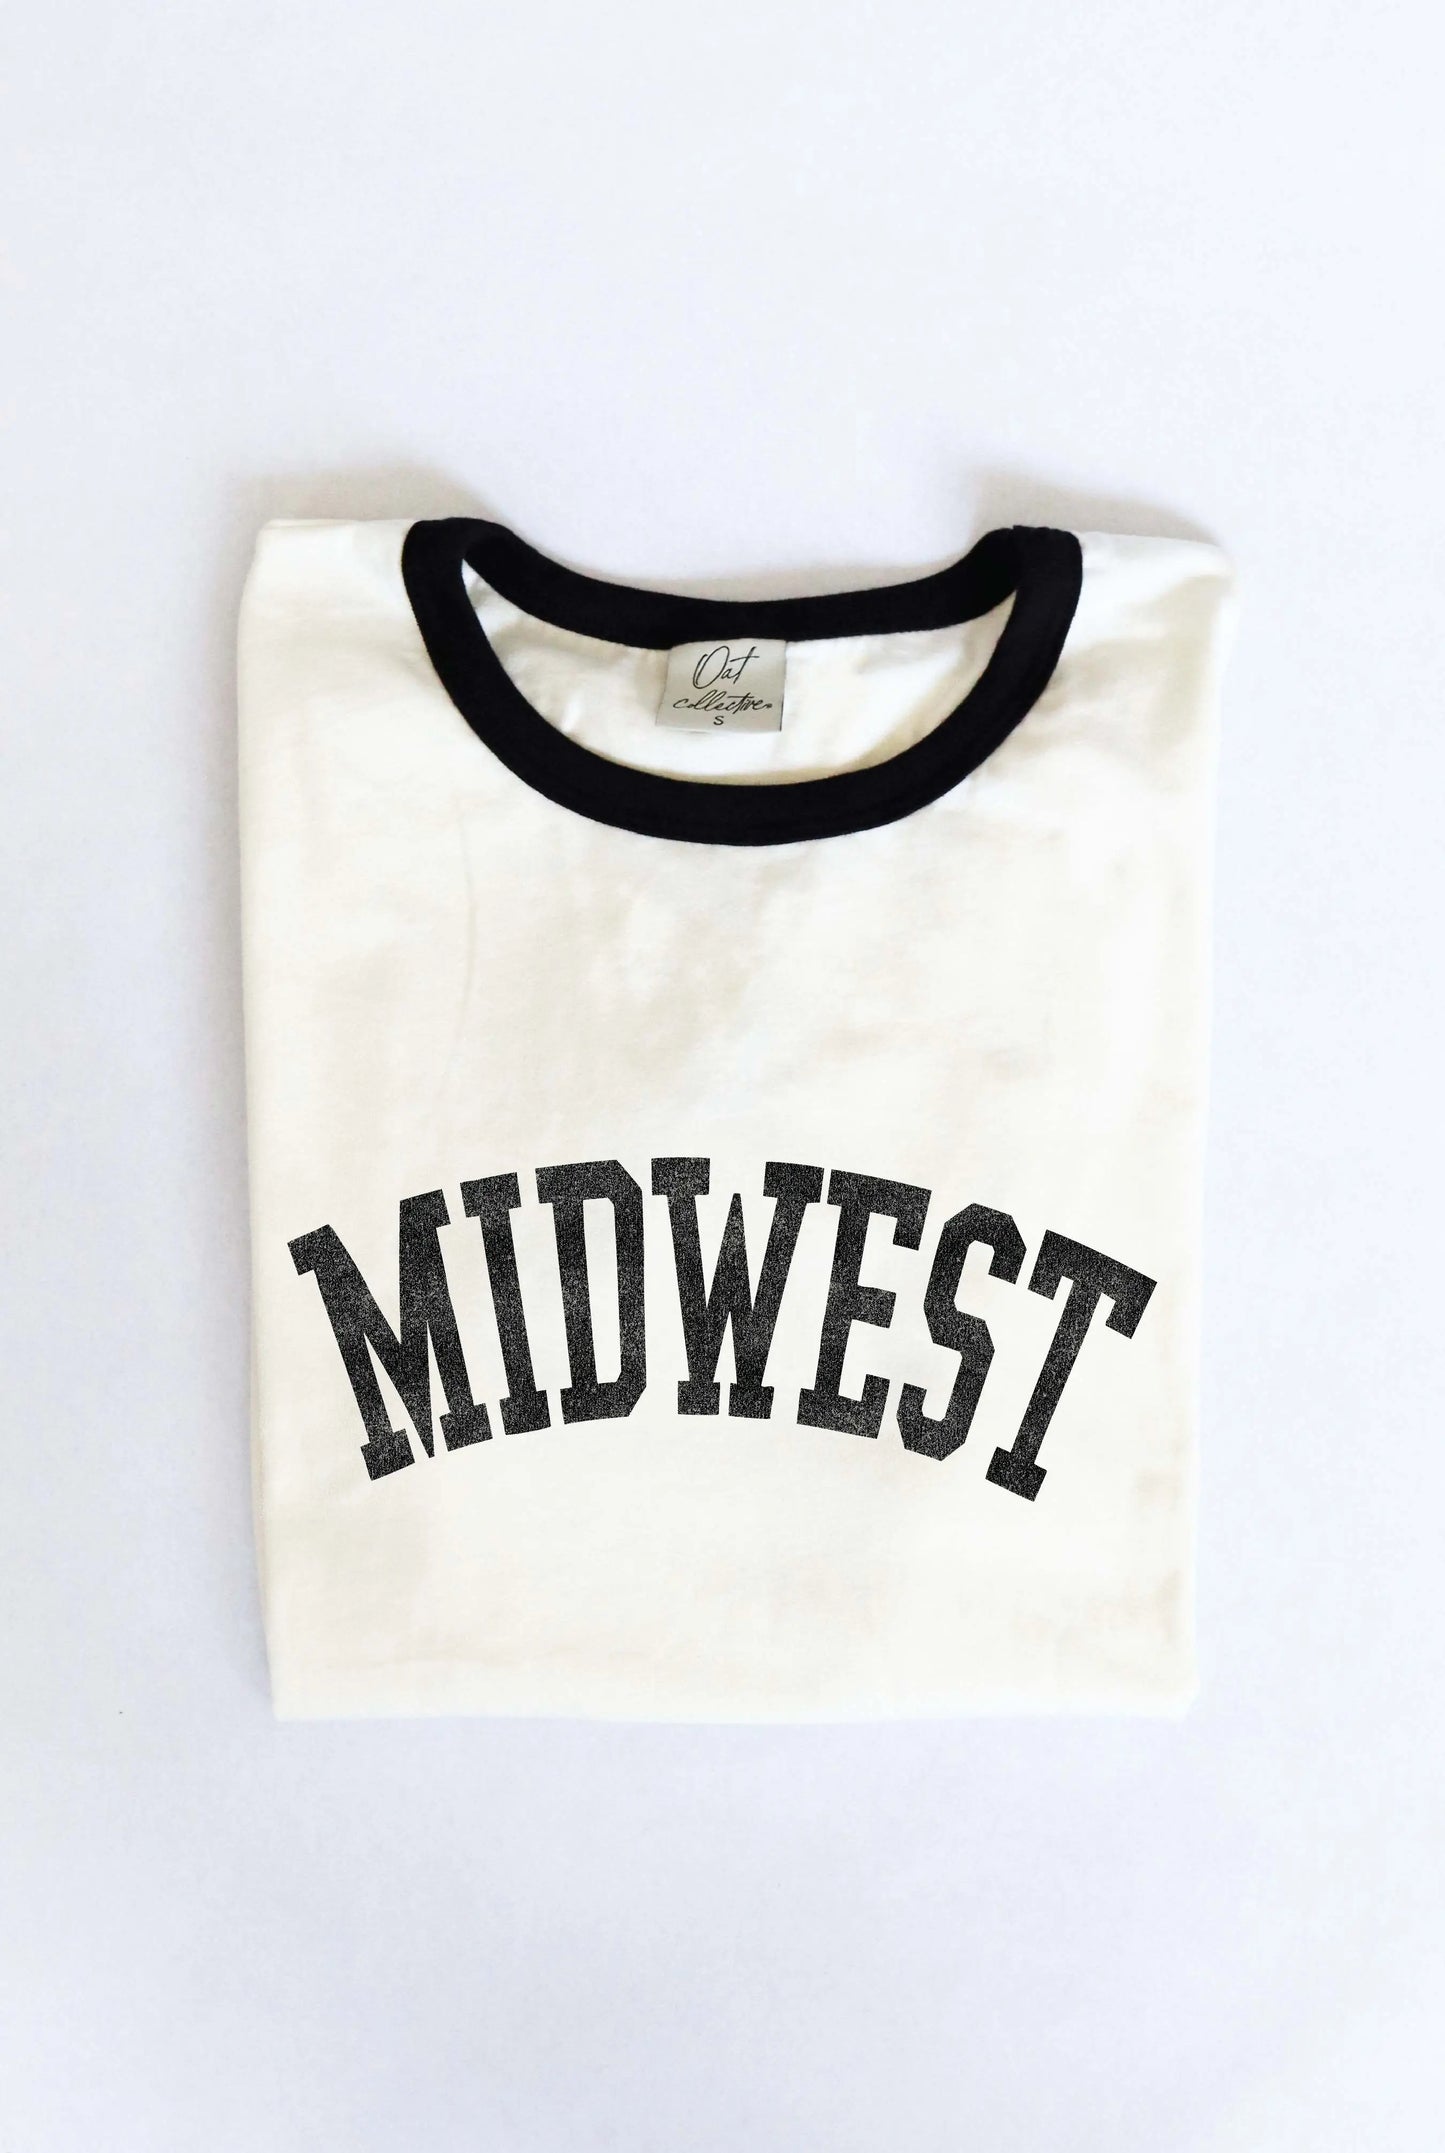 MIDWEST Ringer Tee